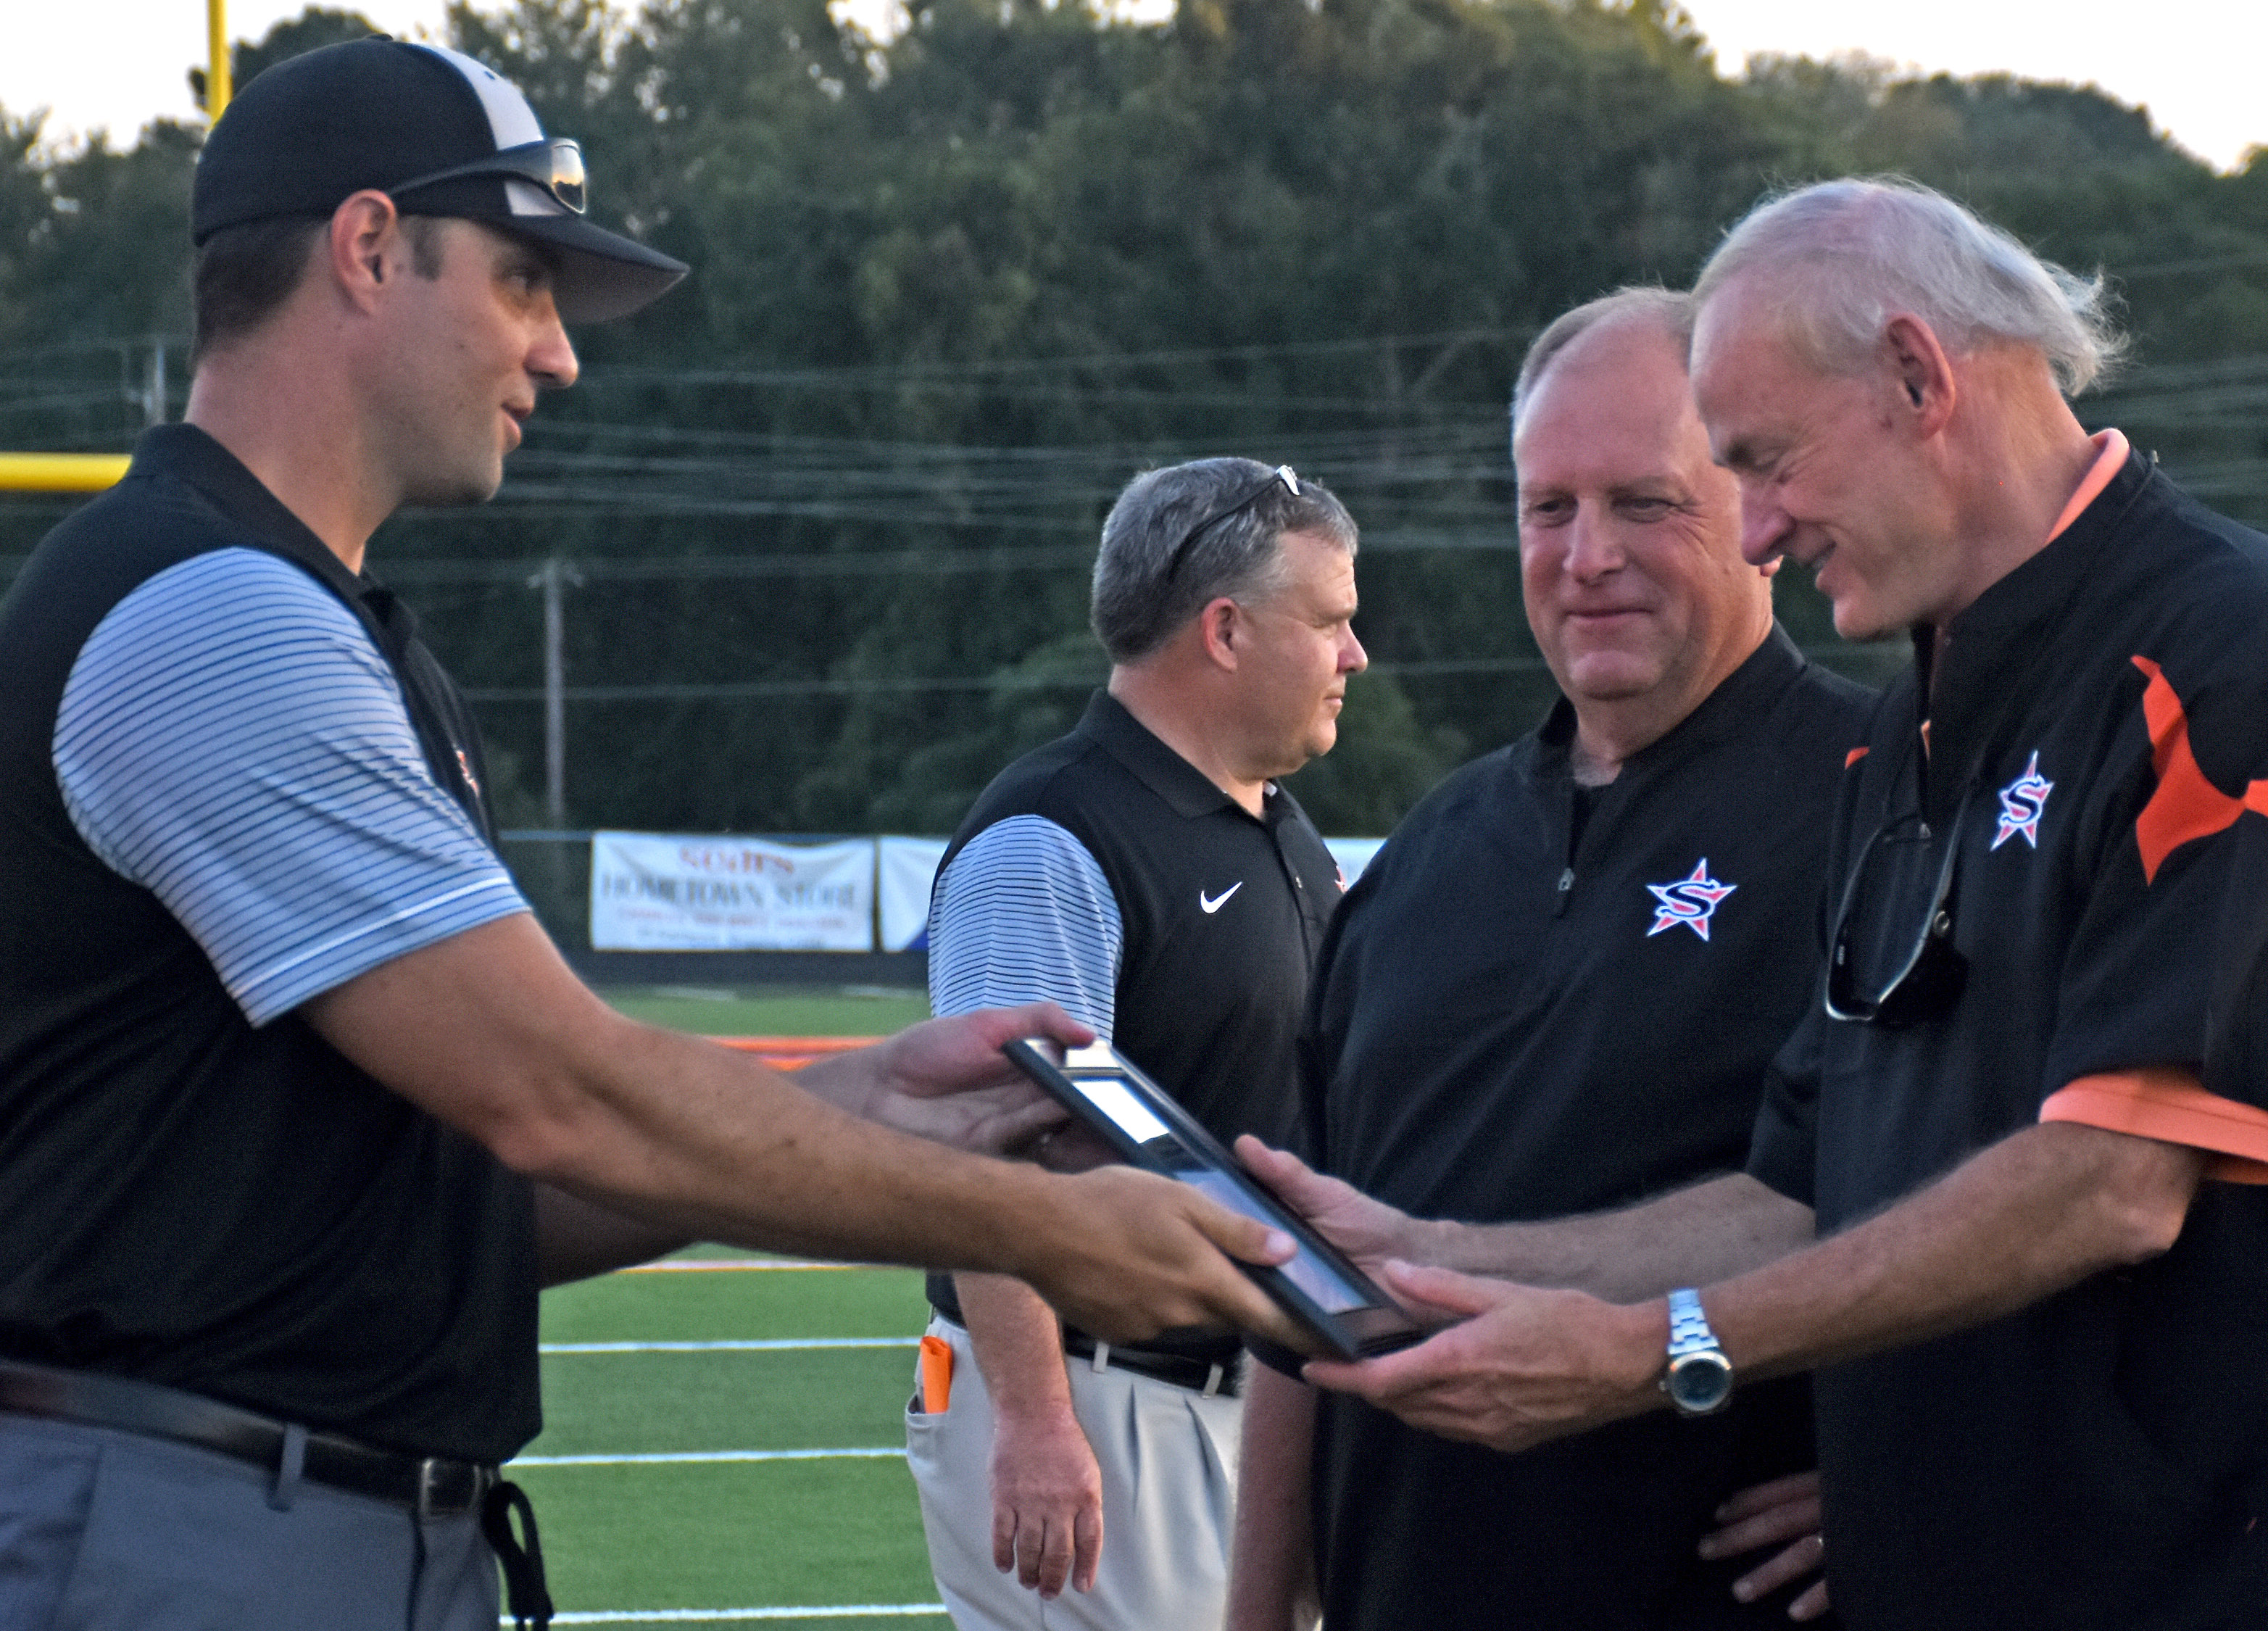 Coach Mike Volarvich presents a picture of Scrapper Stadium to thurf donor Dr. Tim Bainum of Diamond Bank as Bob Jamison watches before Friday's game. All of the turf sponsors were recognized in a pre-game ceremony.